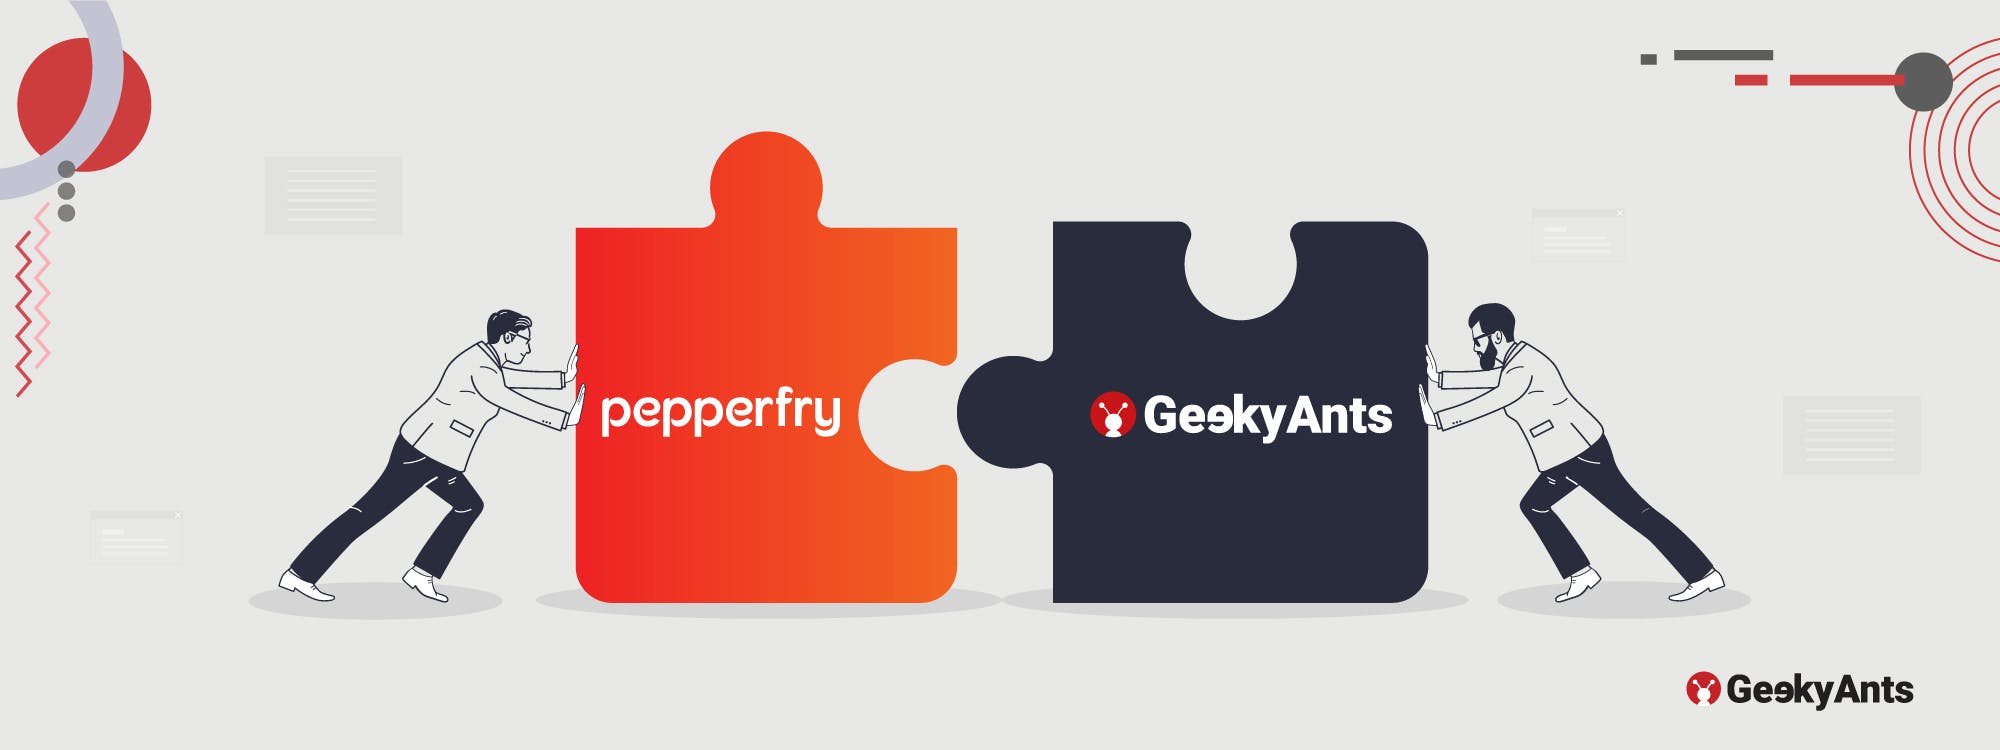 Geekyants Partners With Pepperfry